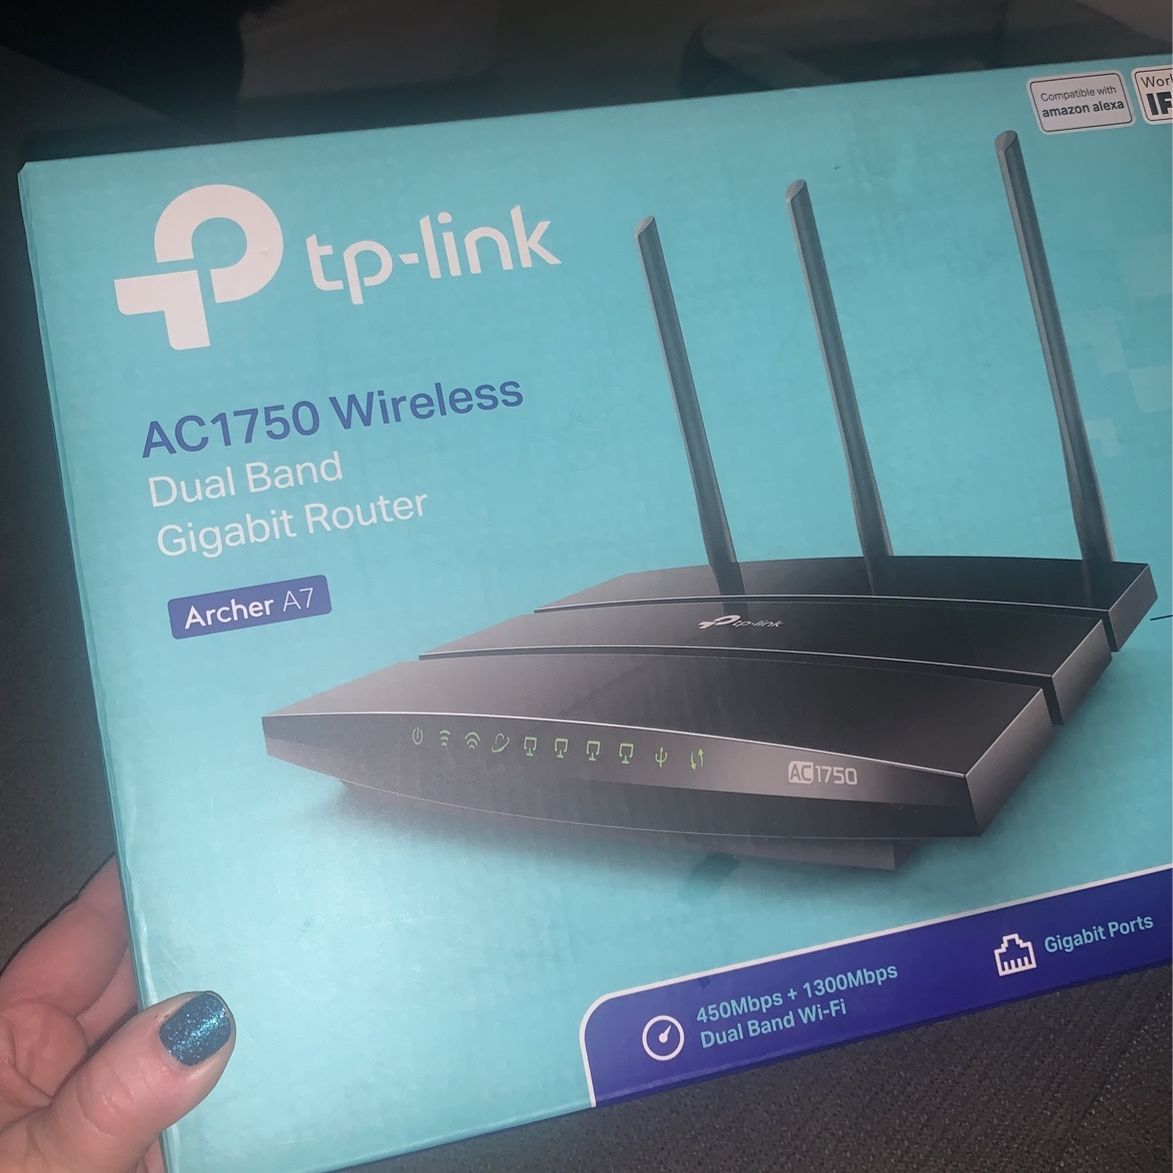 tp-link AC1750 Wireless Dual Band Gigabit Router